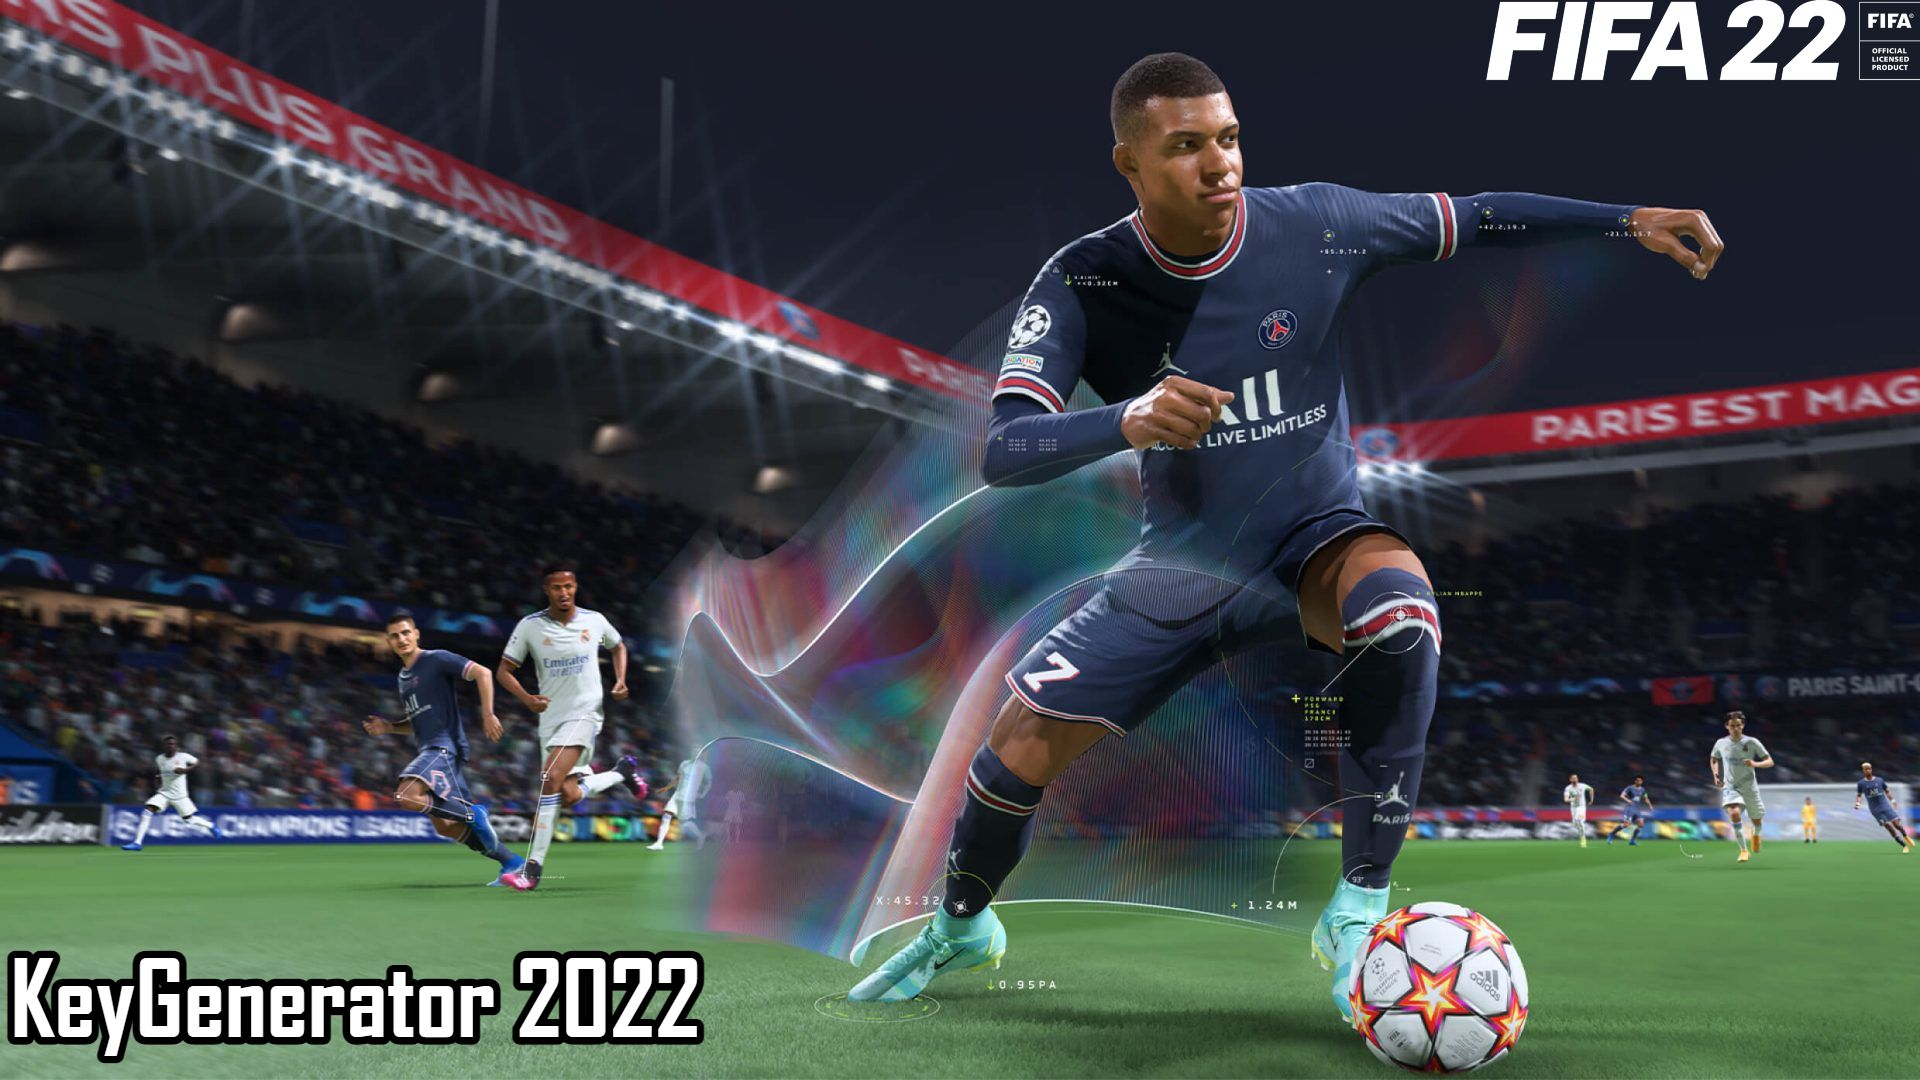 You are currently viewing FIFA 22 KeyGenerator 2022